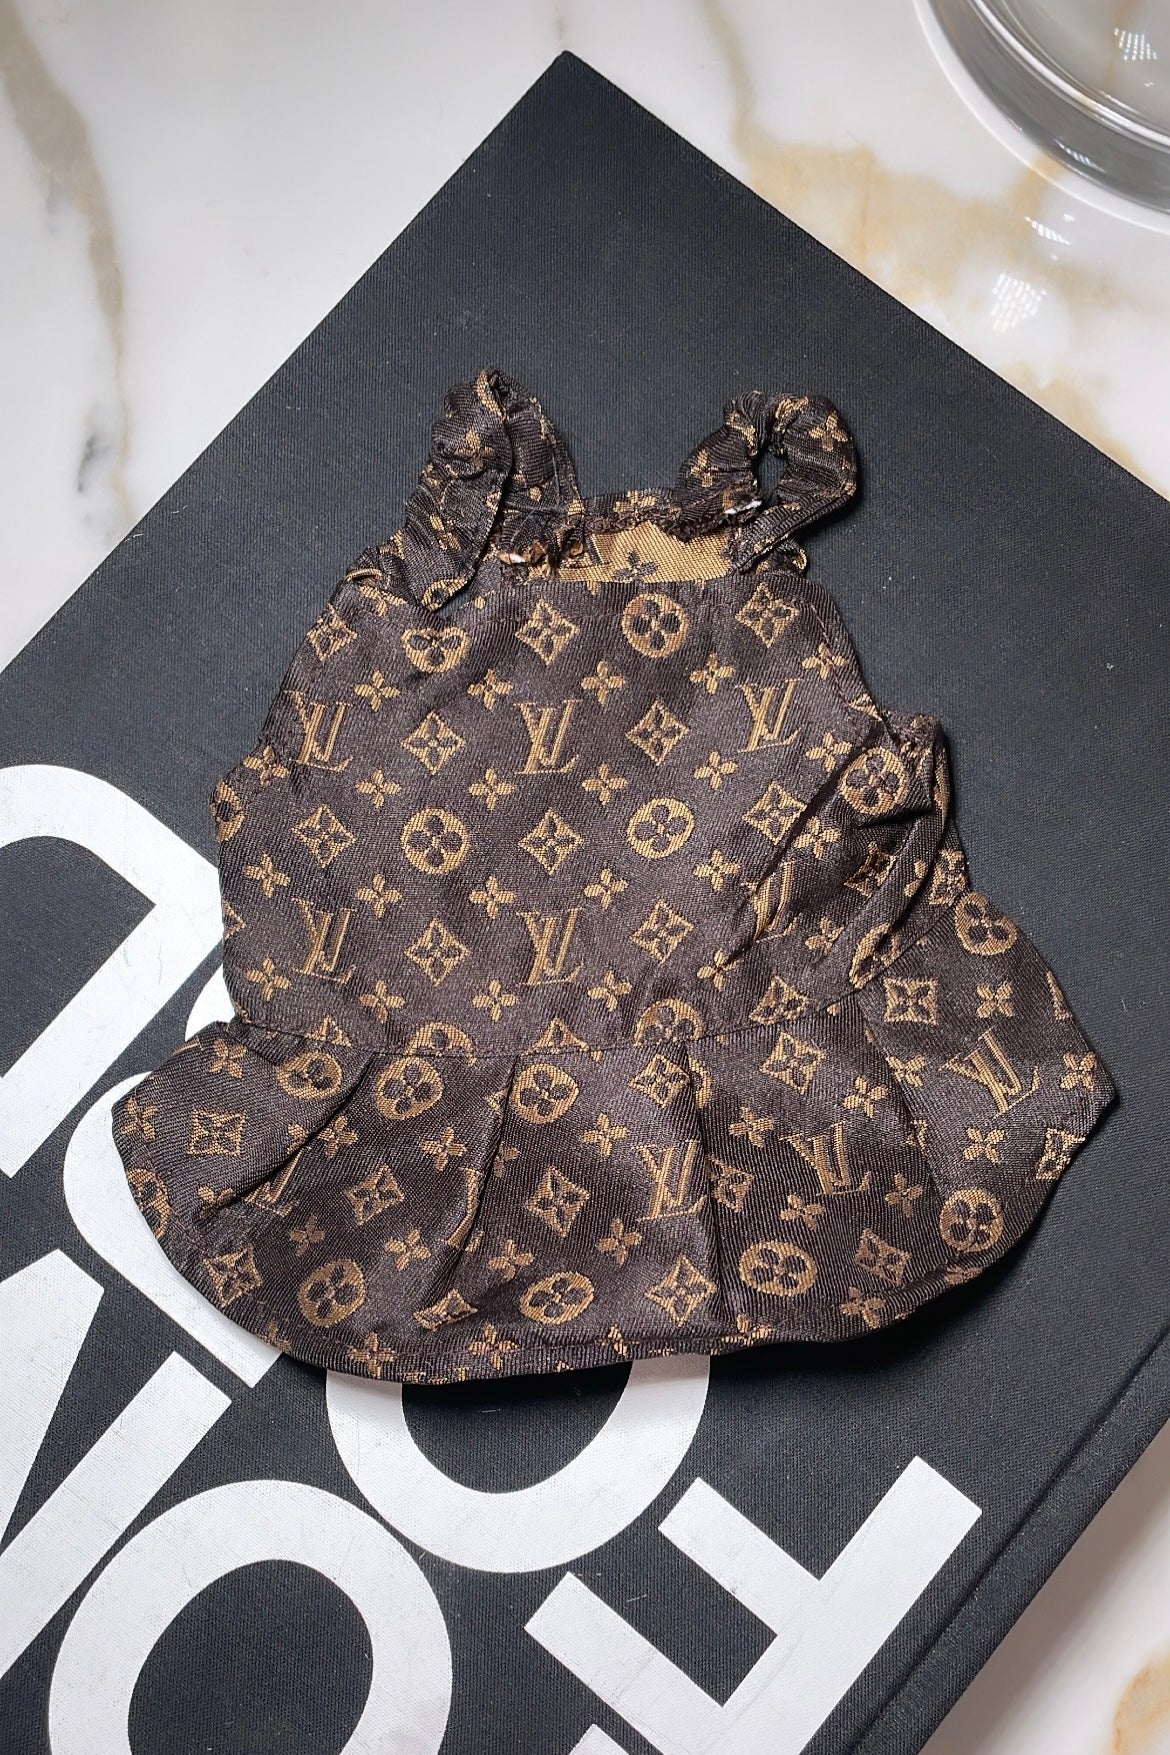 Furry Vuitton Blanket – The Pawster